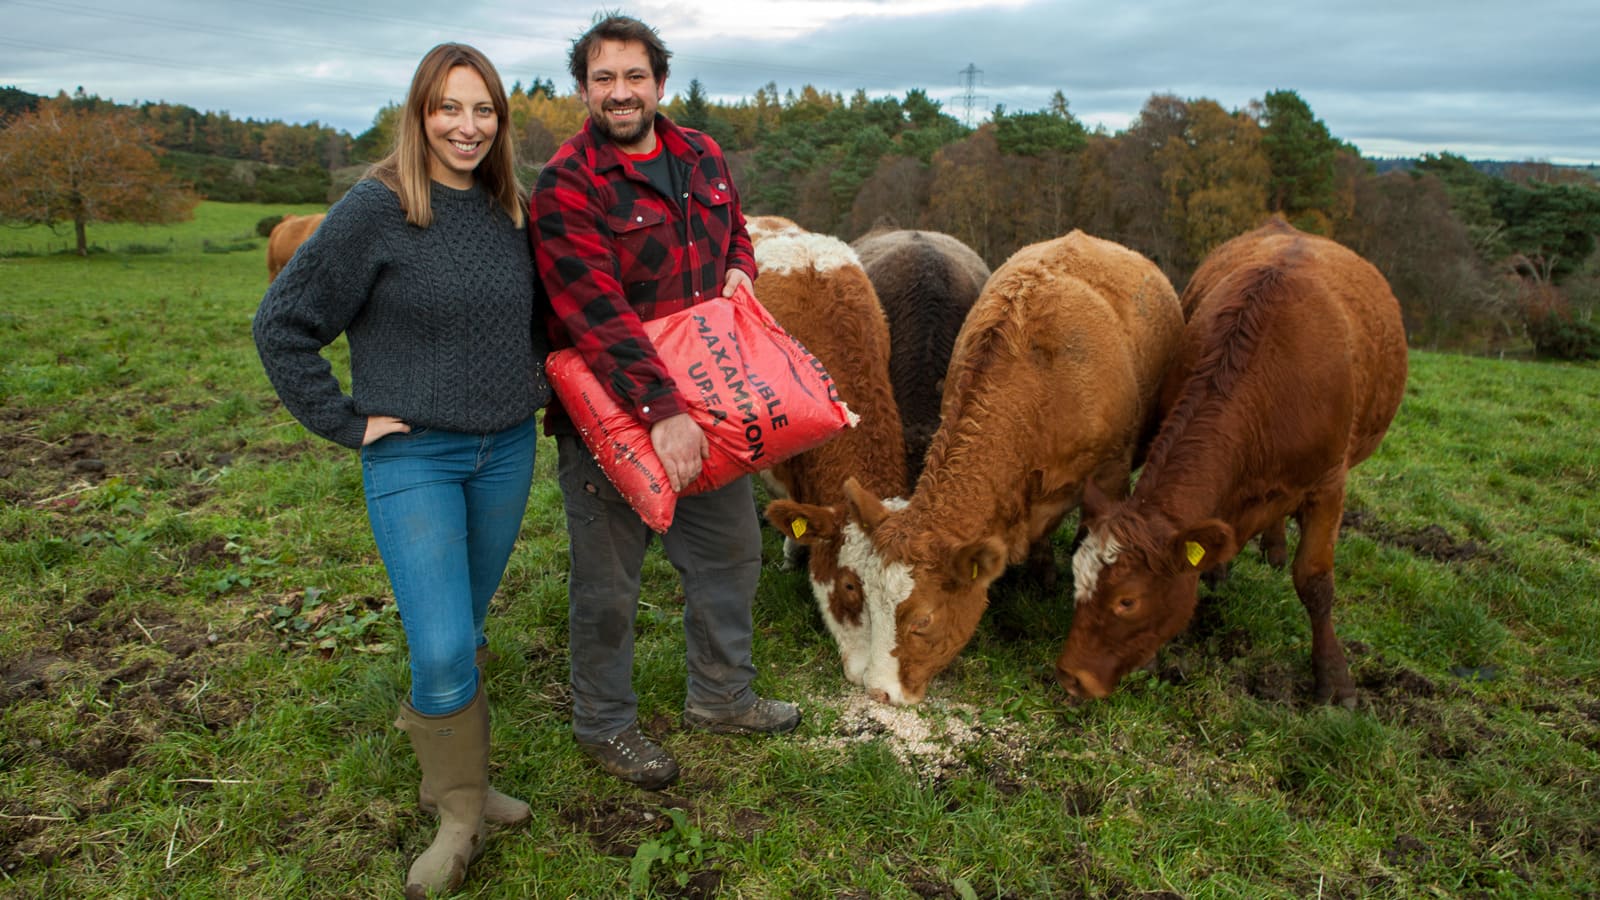 The image shows farmers Joanna and Donald Fraser stand smiling next to a several cows in a field as part of filming for This Farming Life on BBC. Donald holds a bag of feed which is open and has spilled onto the ground, which is being eaten by the cows.